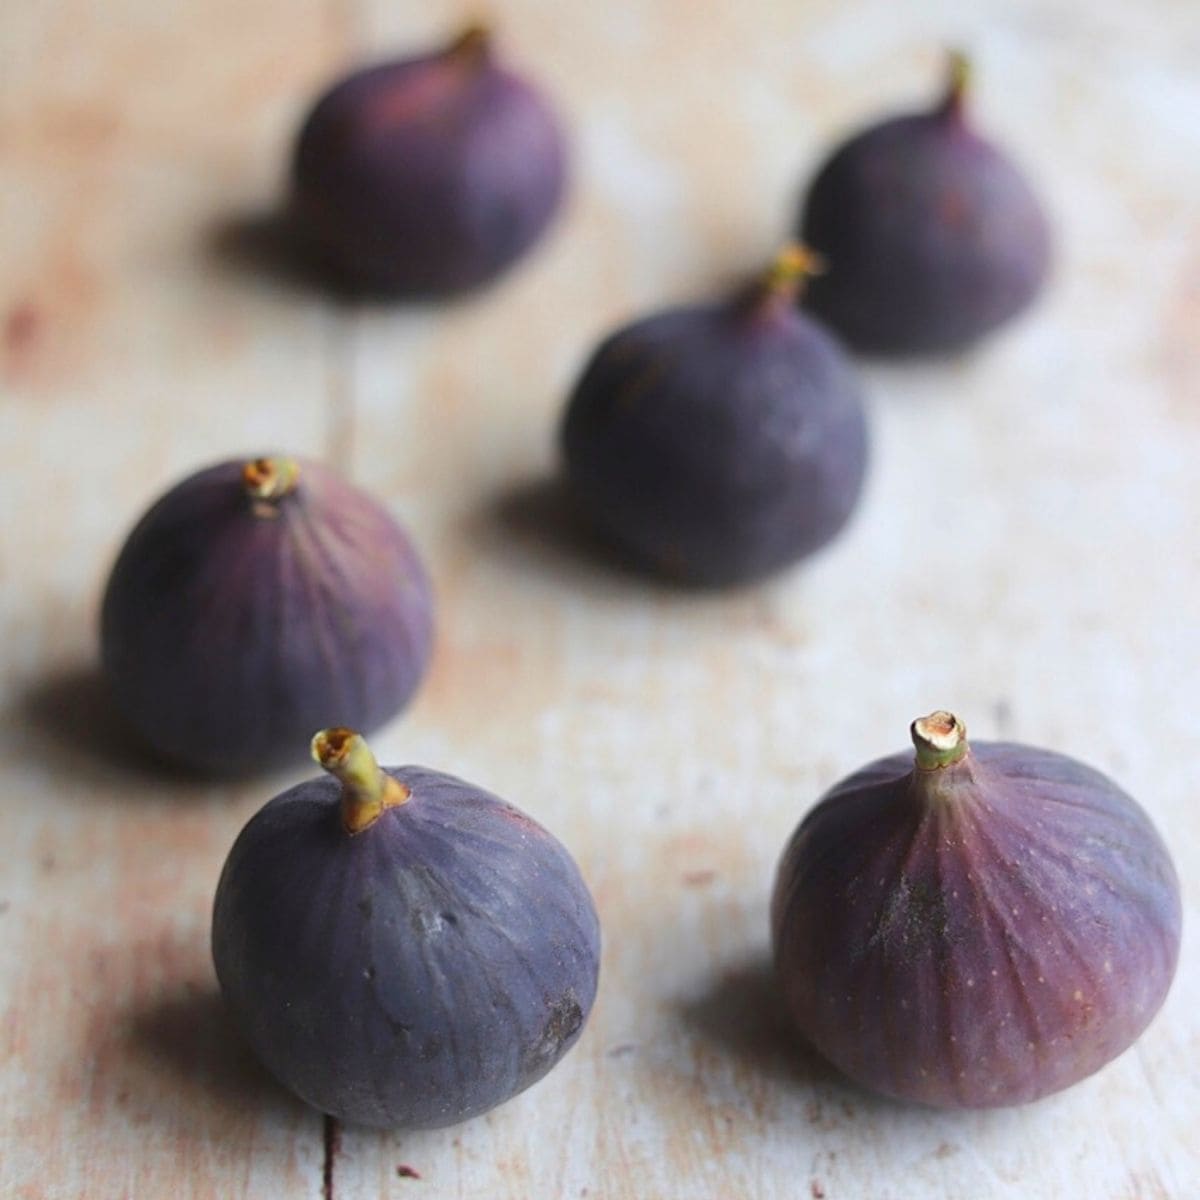 Black Mission figs on wooden table